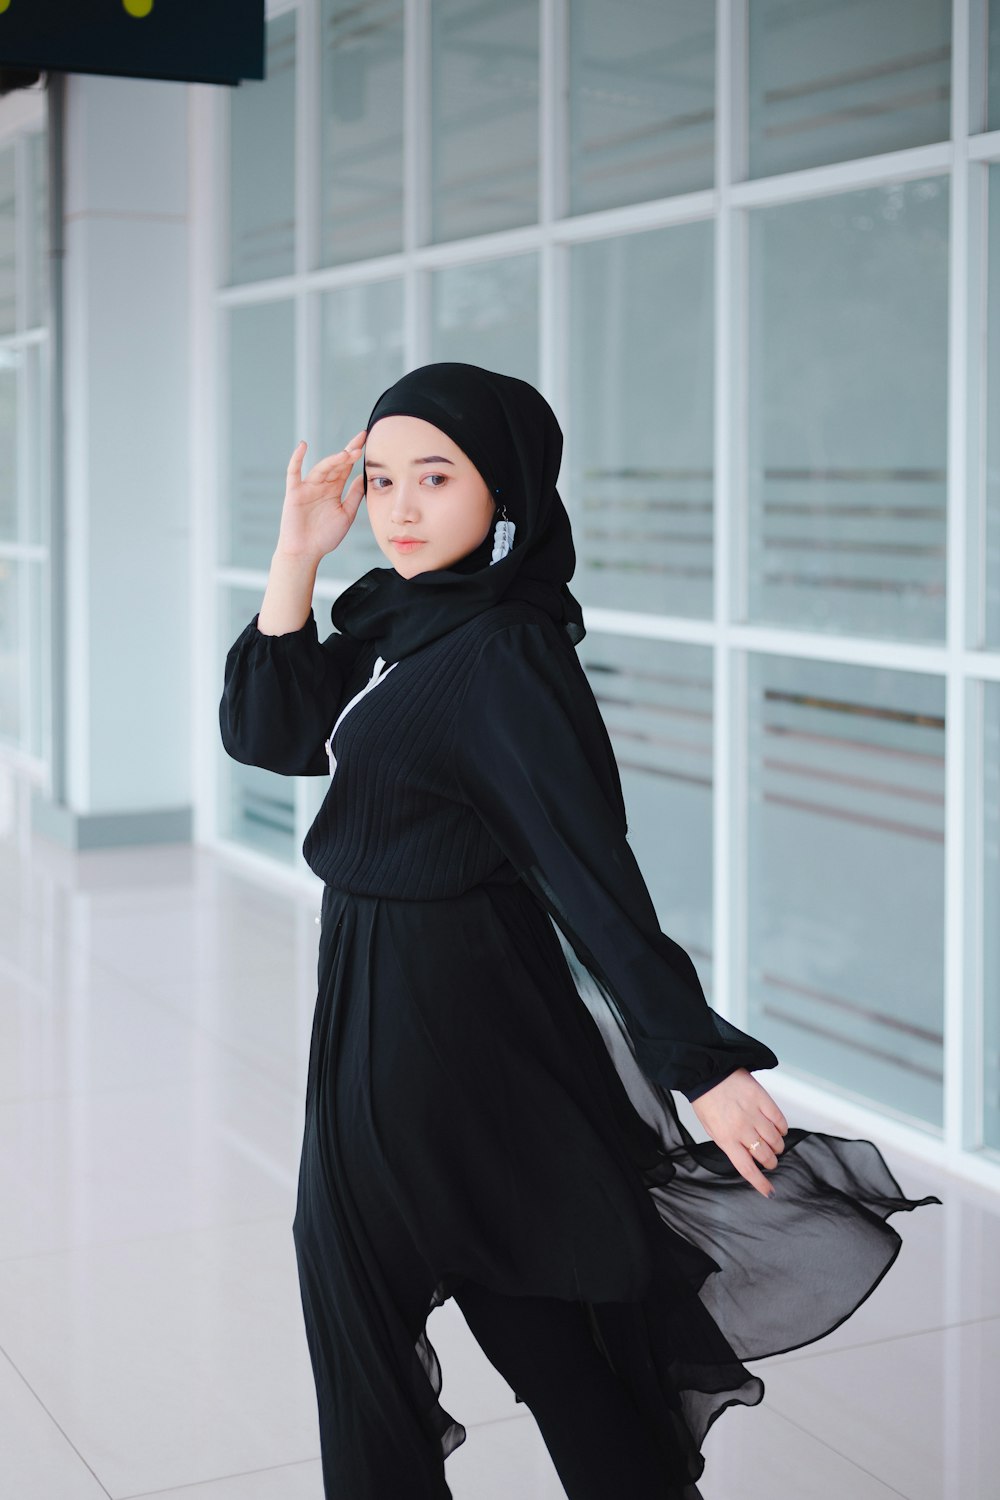 a woman in a hijab poses for a picture